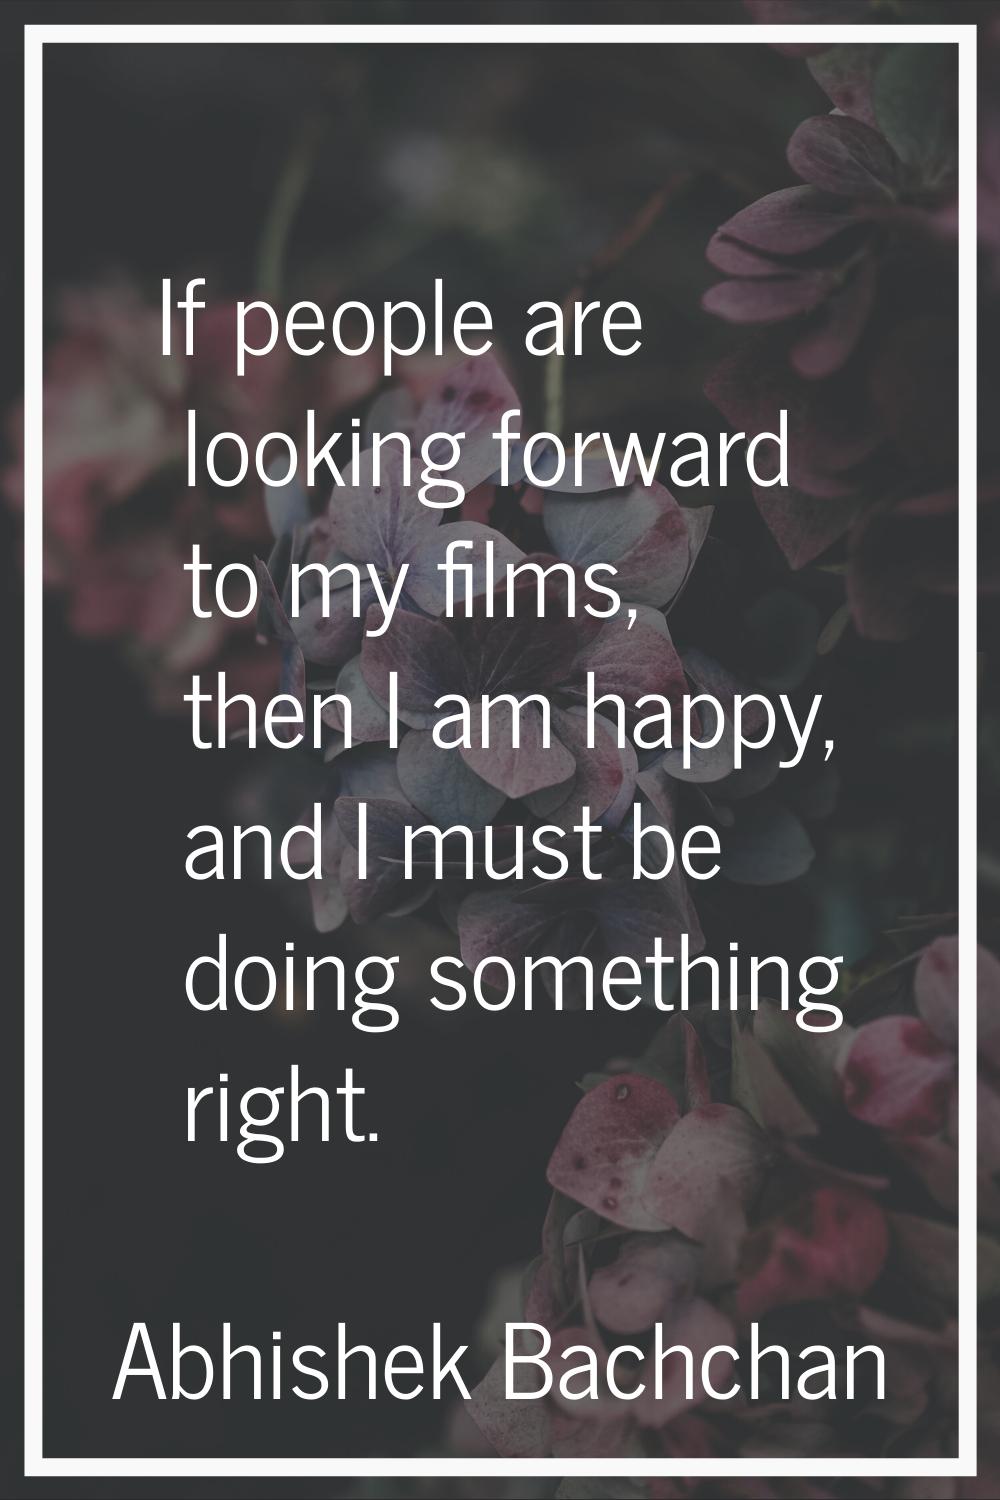 If people are looking forward to my films, then I am happy, and I must be doing something right.